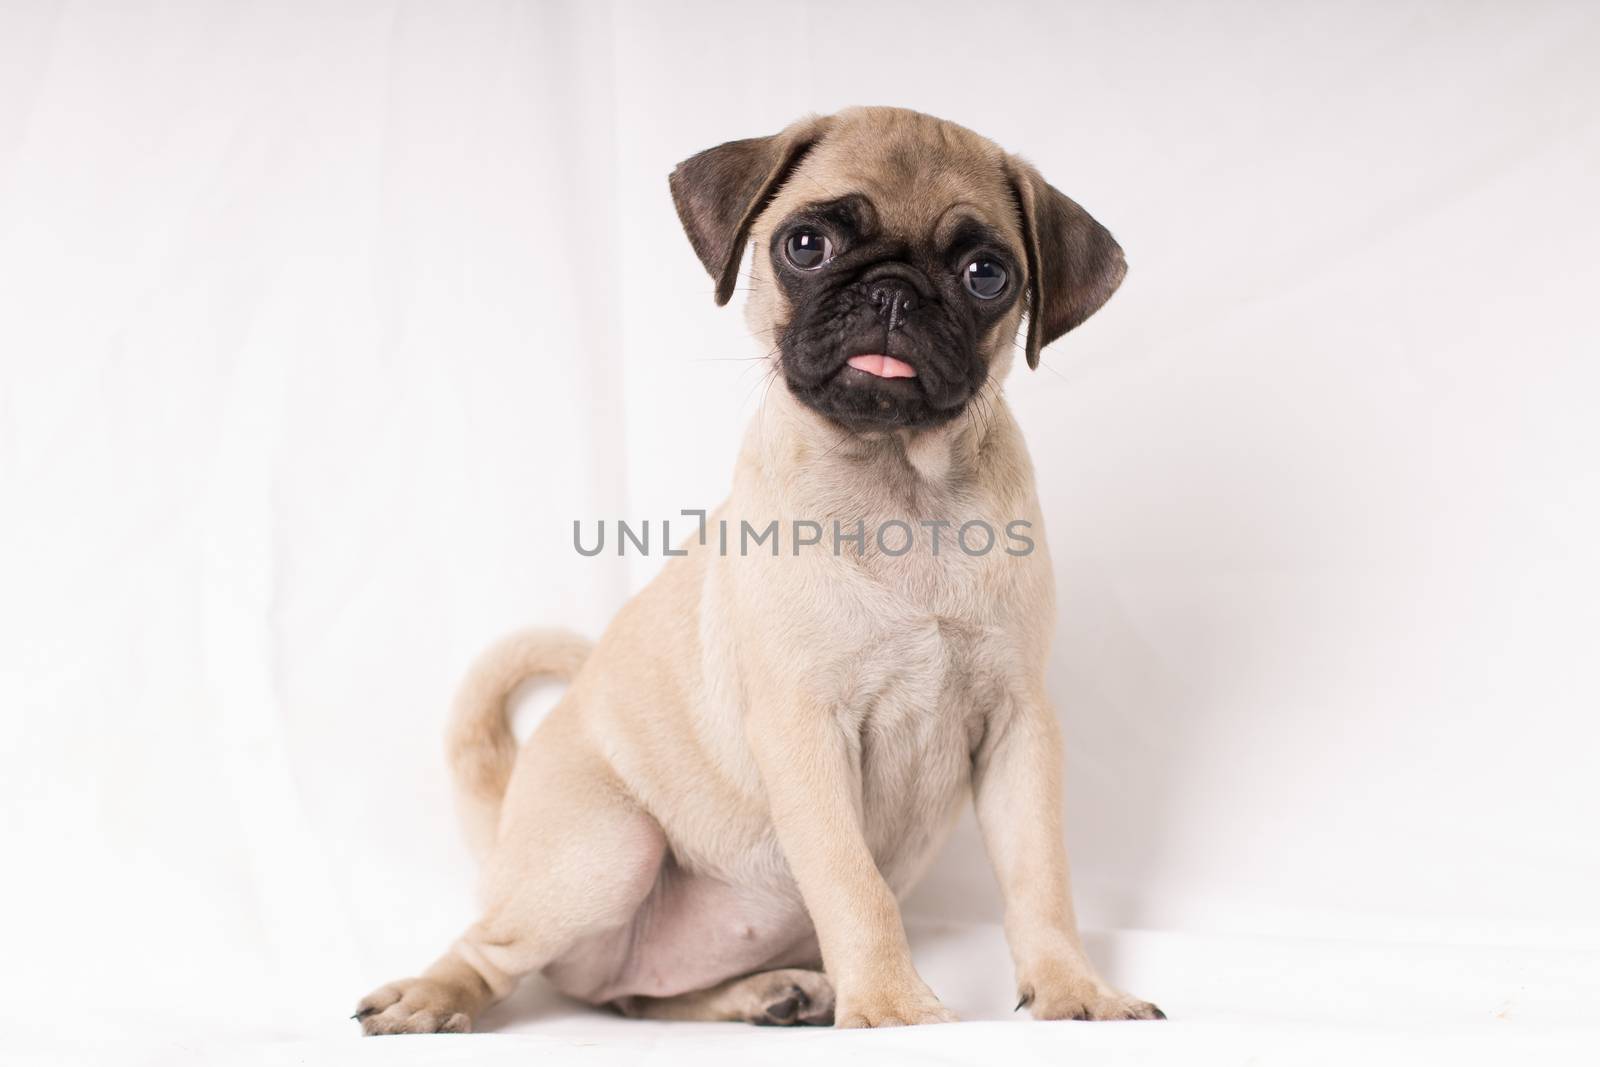 Funny portrait pug dog with tongue out looking at camera isolate by endika_zulaika